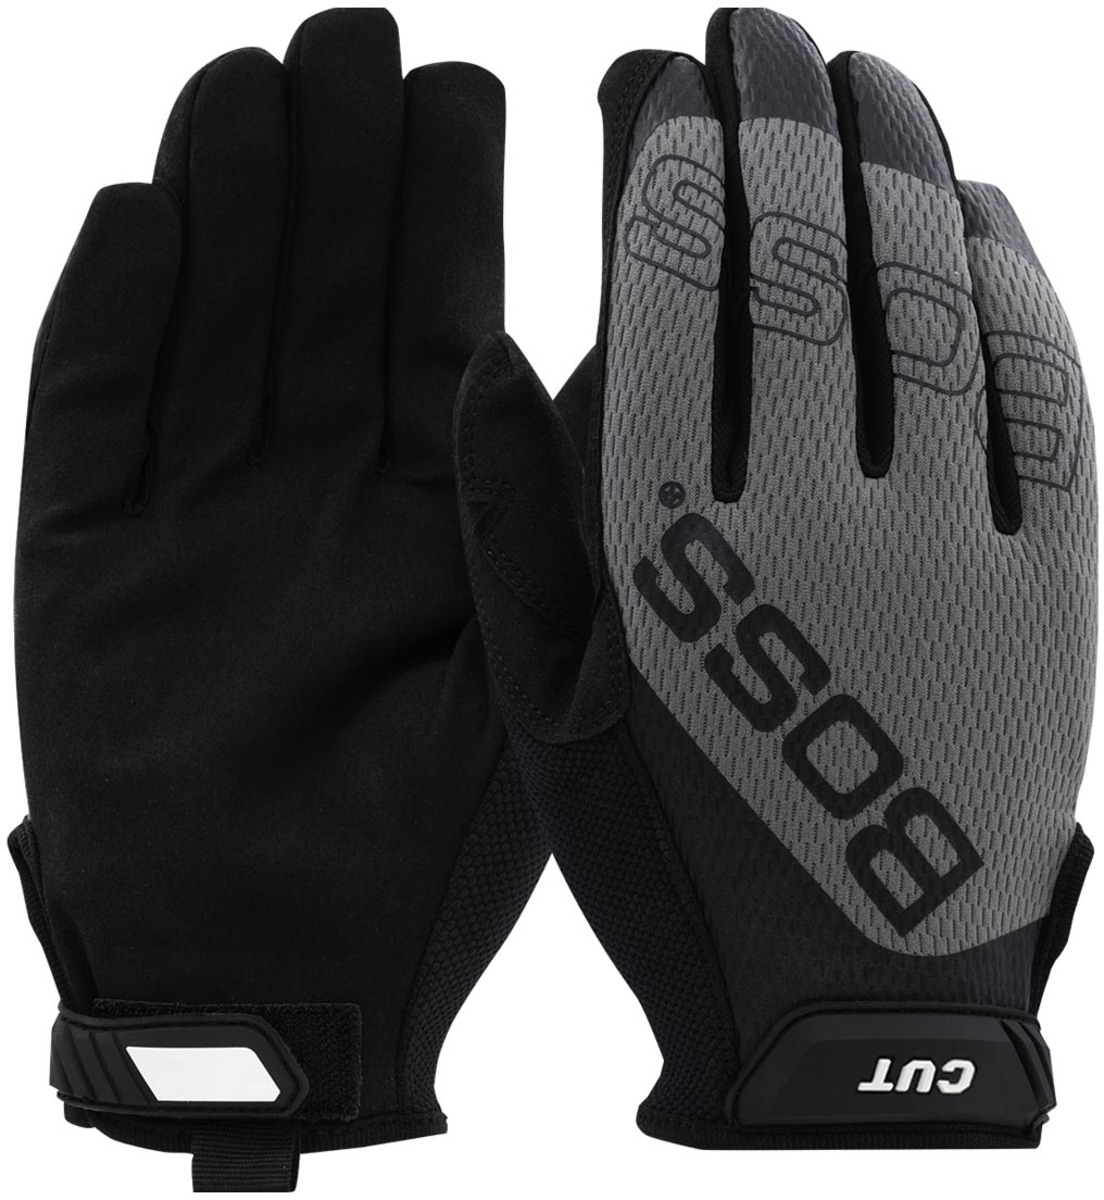 PIP Barracuda Cut Resistant HPPE Gloves